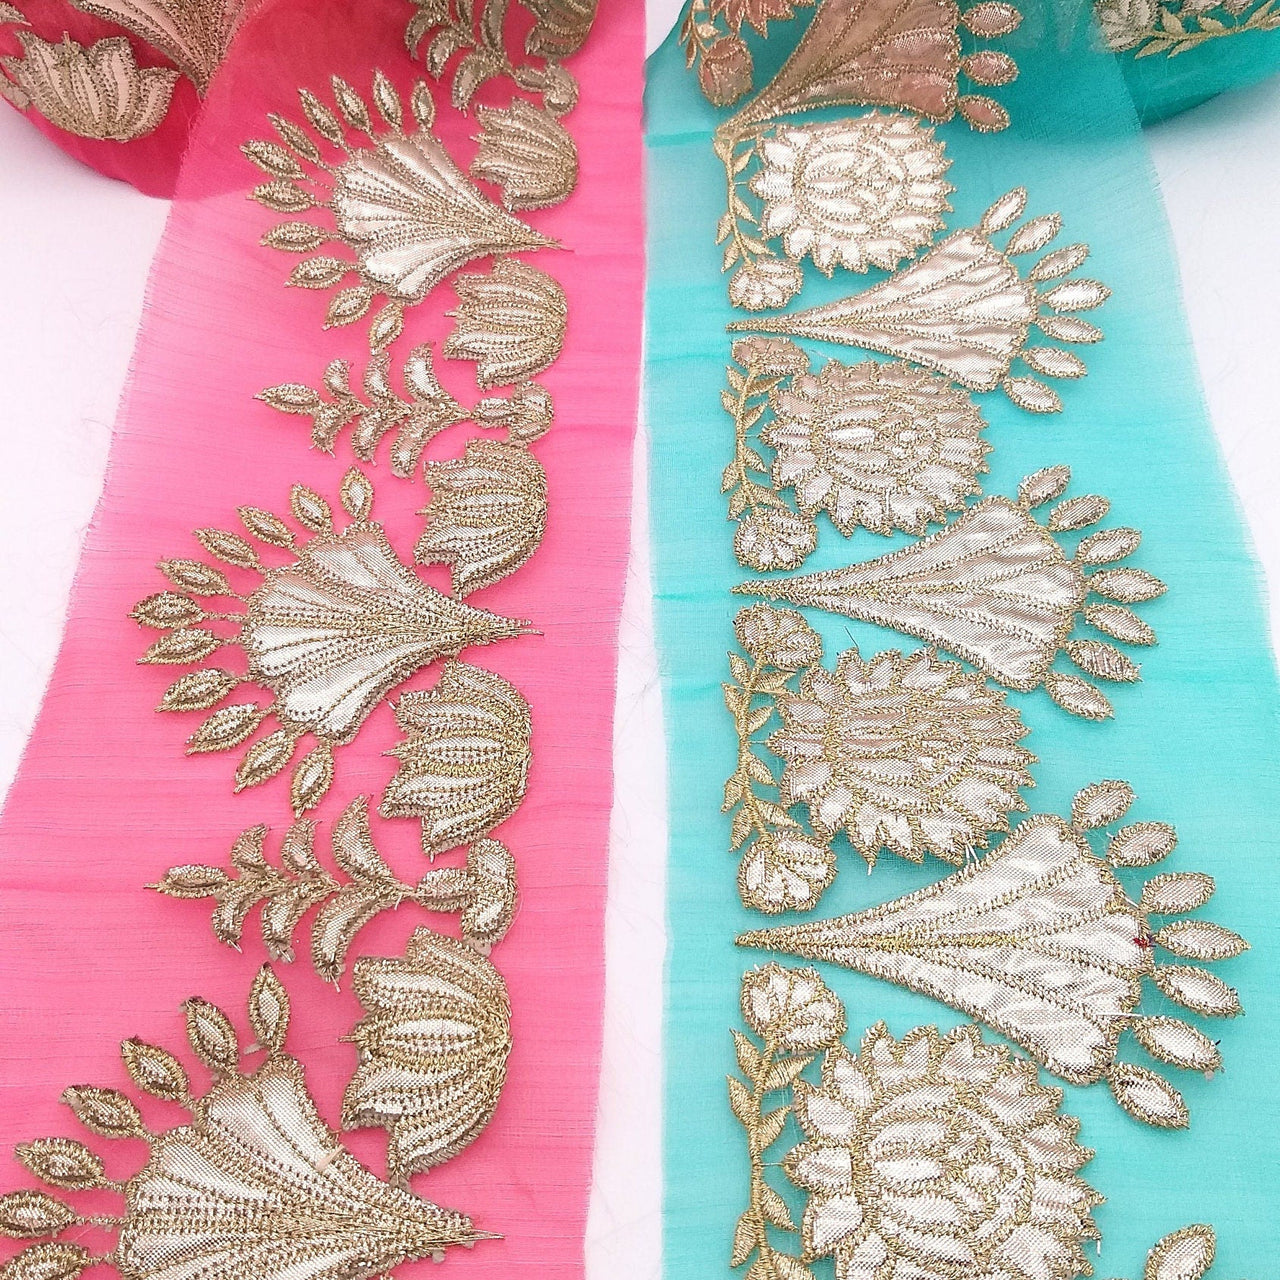 Pink Tissue Fabric Lace Trim with Gota Patti Embroidery, Foiled Embroidery in Silver, Sari Border Trim By Yard Decorative Trim Craft Lace